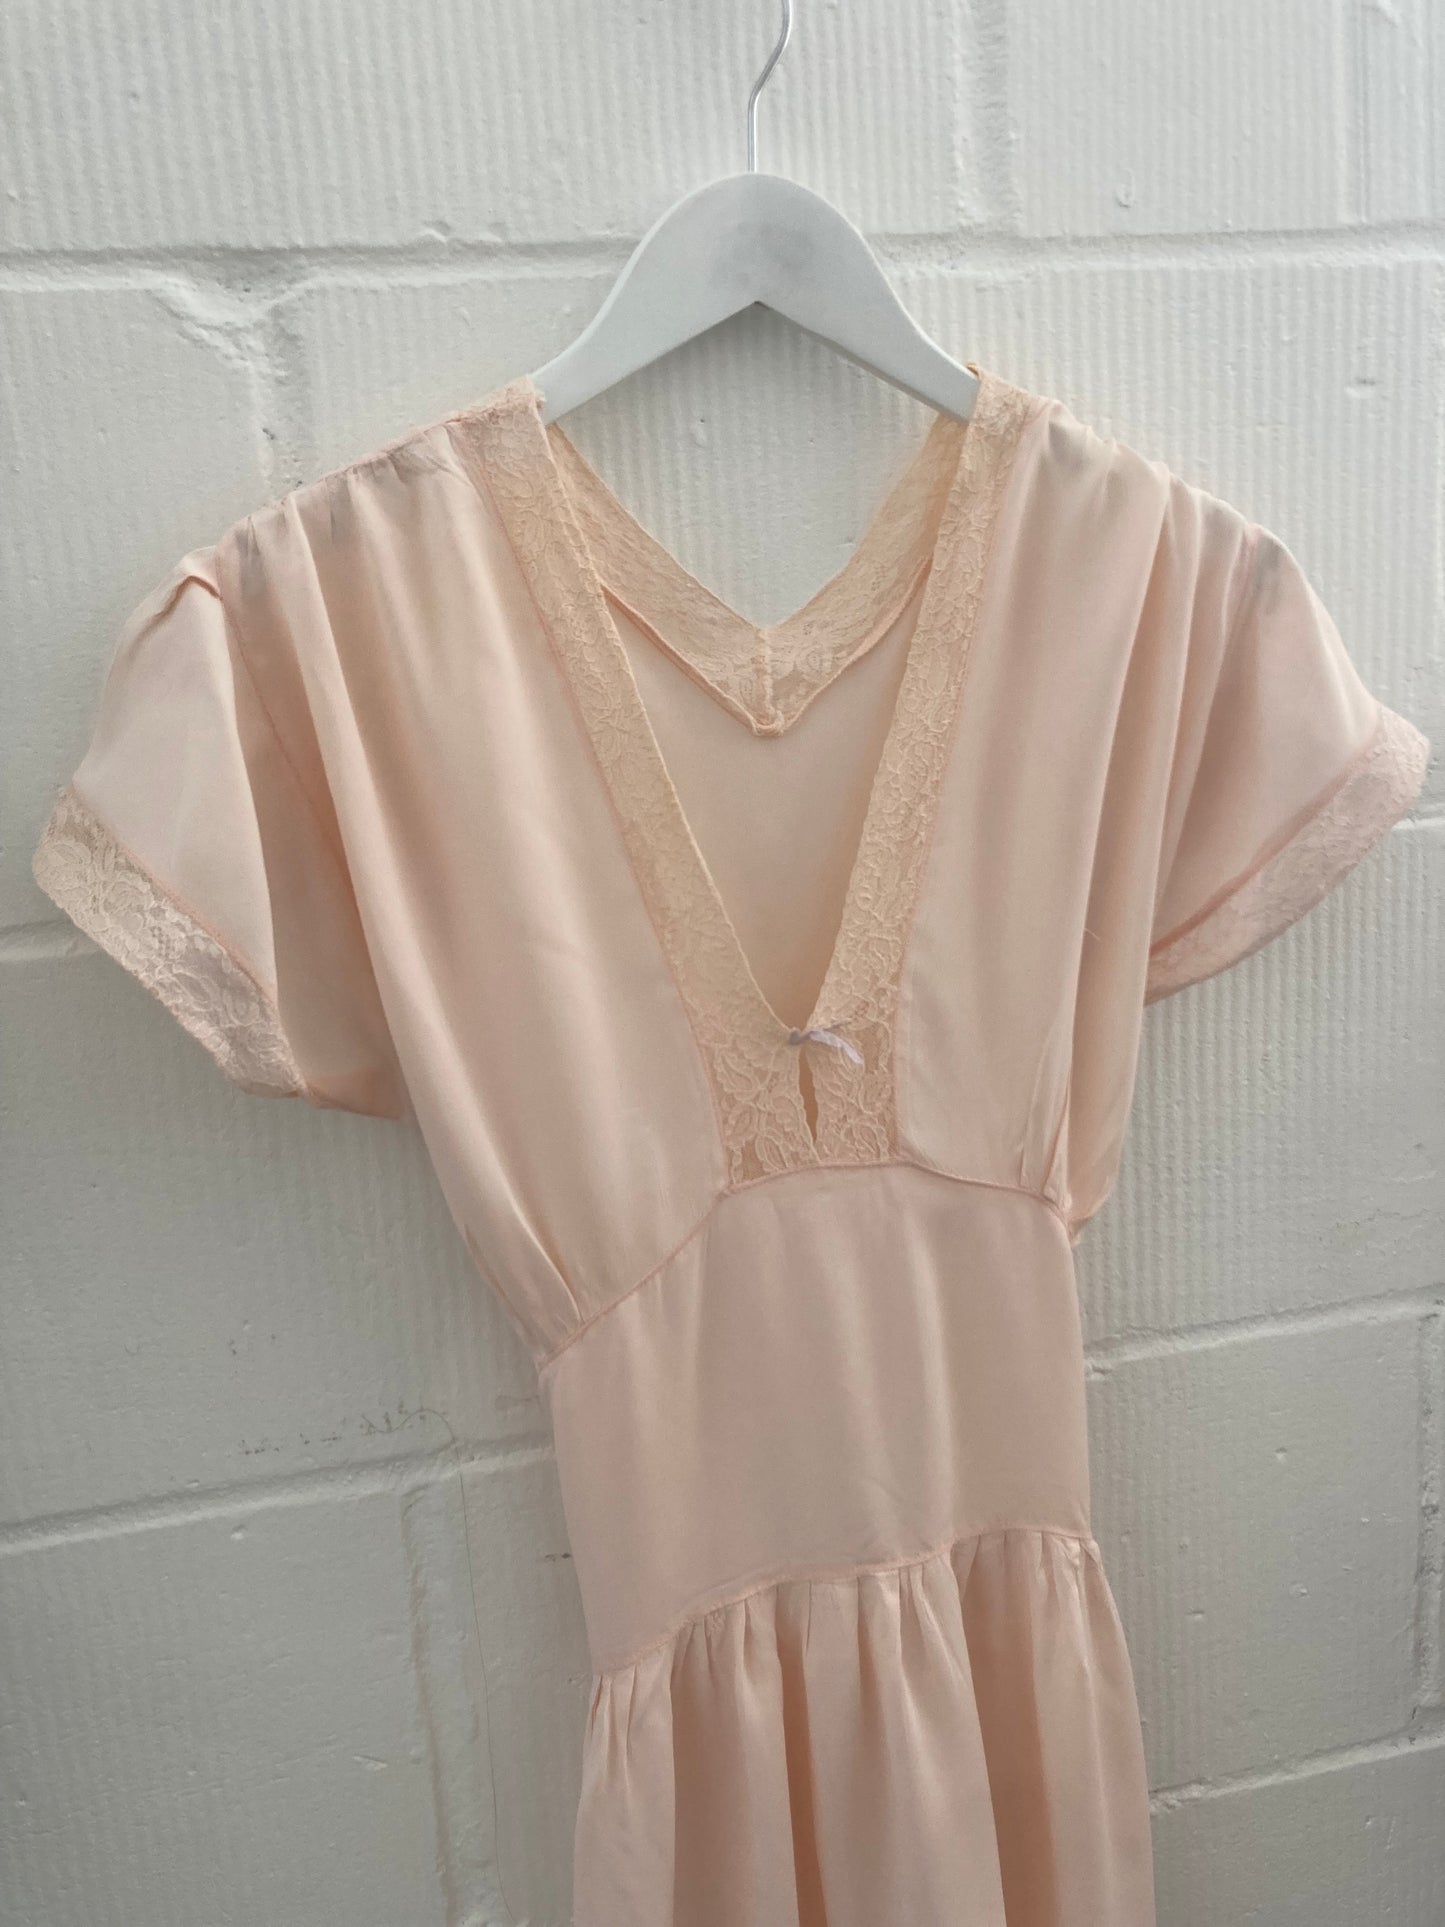 1940s Pink Midi Nightgown with Lace Trim Size L